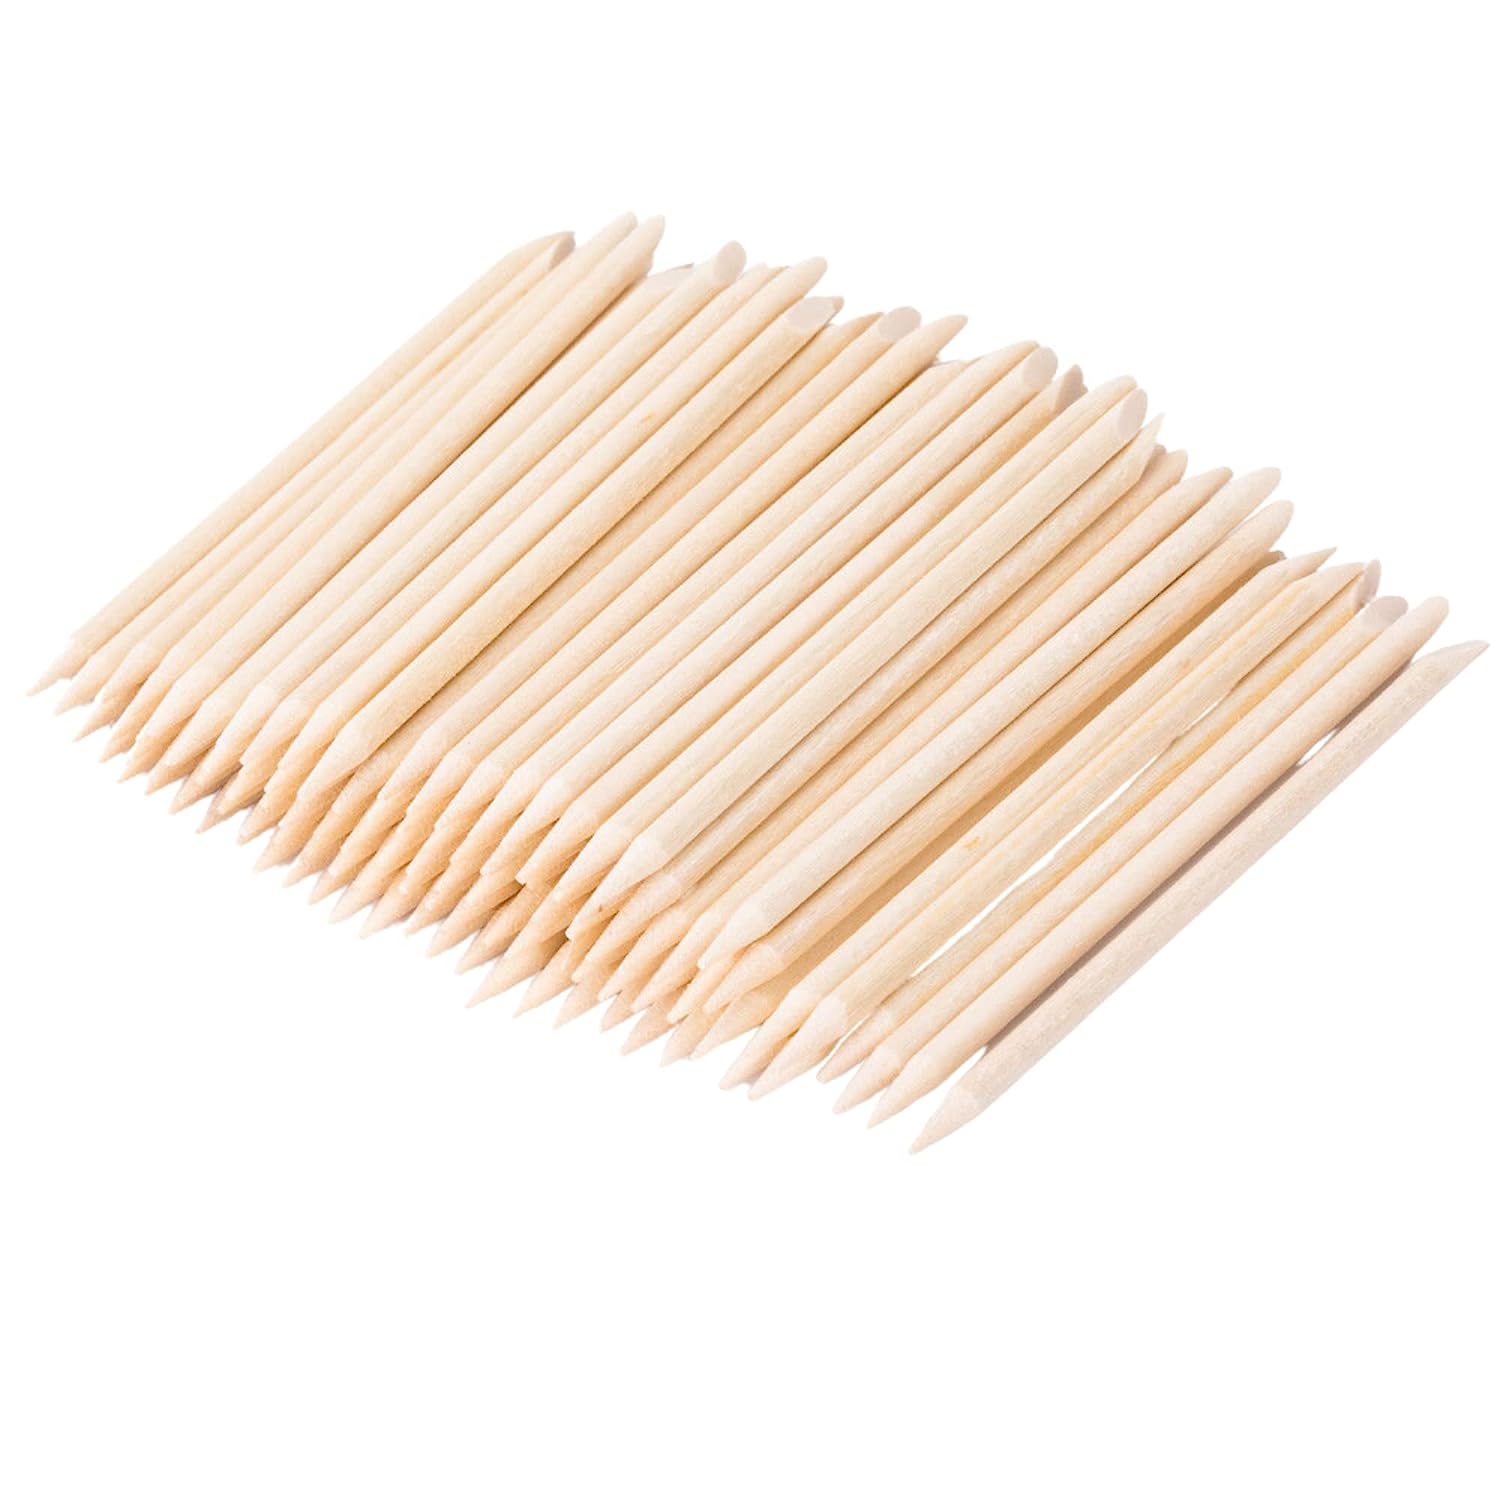 Inlaq® Orange Wood Cuticle Sticks - The Professional Tool for Manicure and Pedicure | Precise Push Back of 100